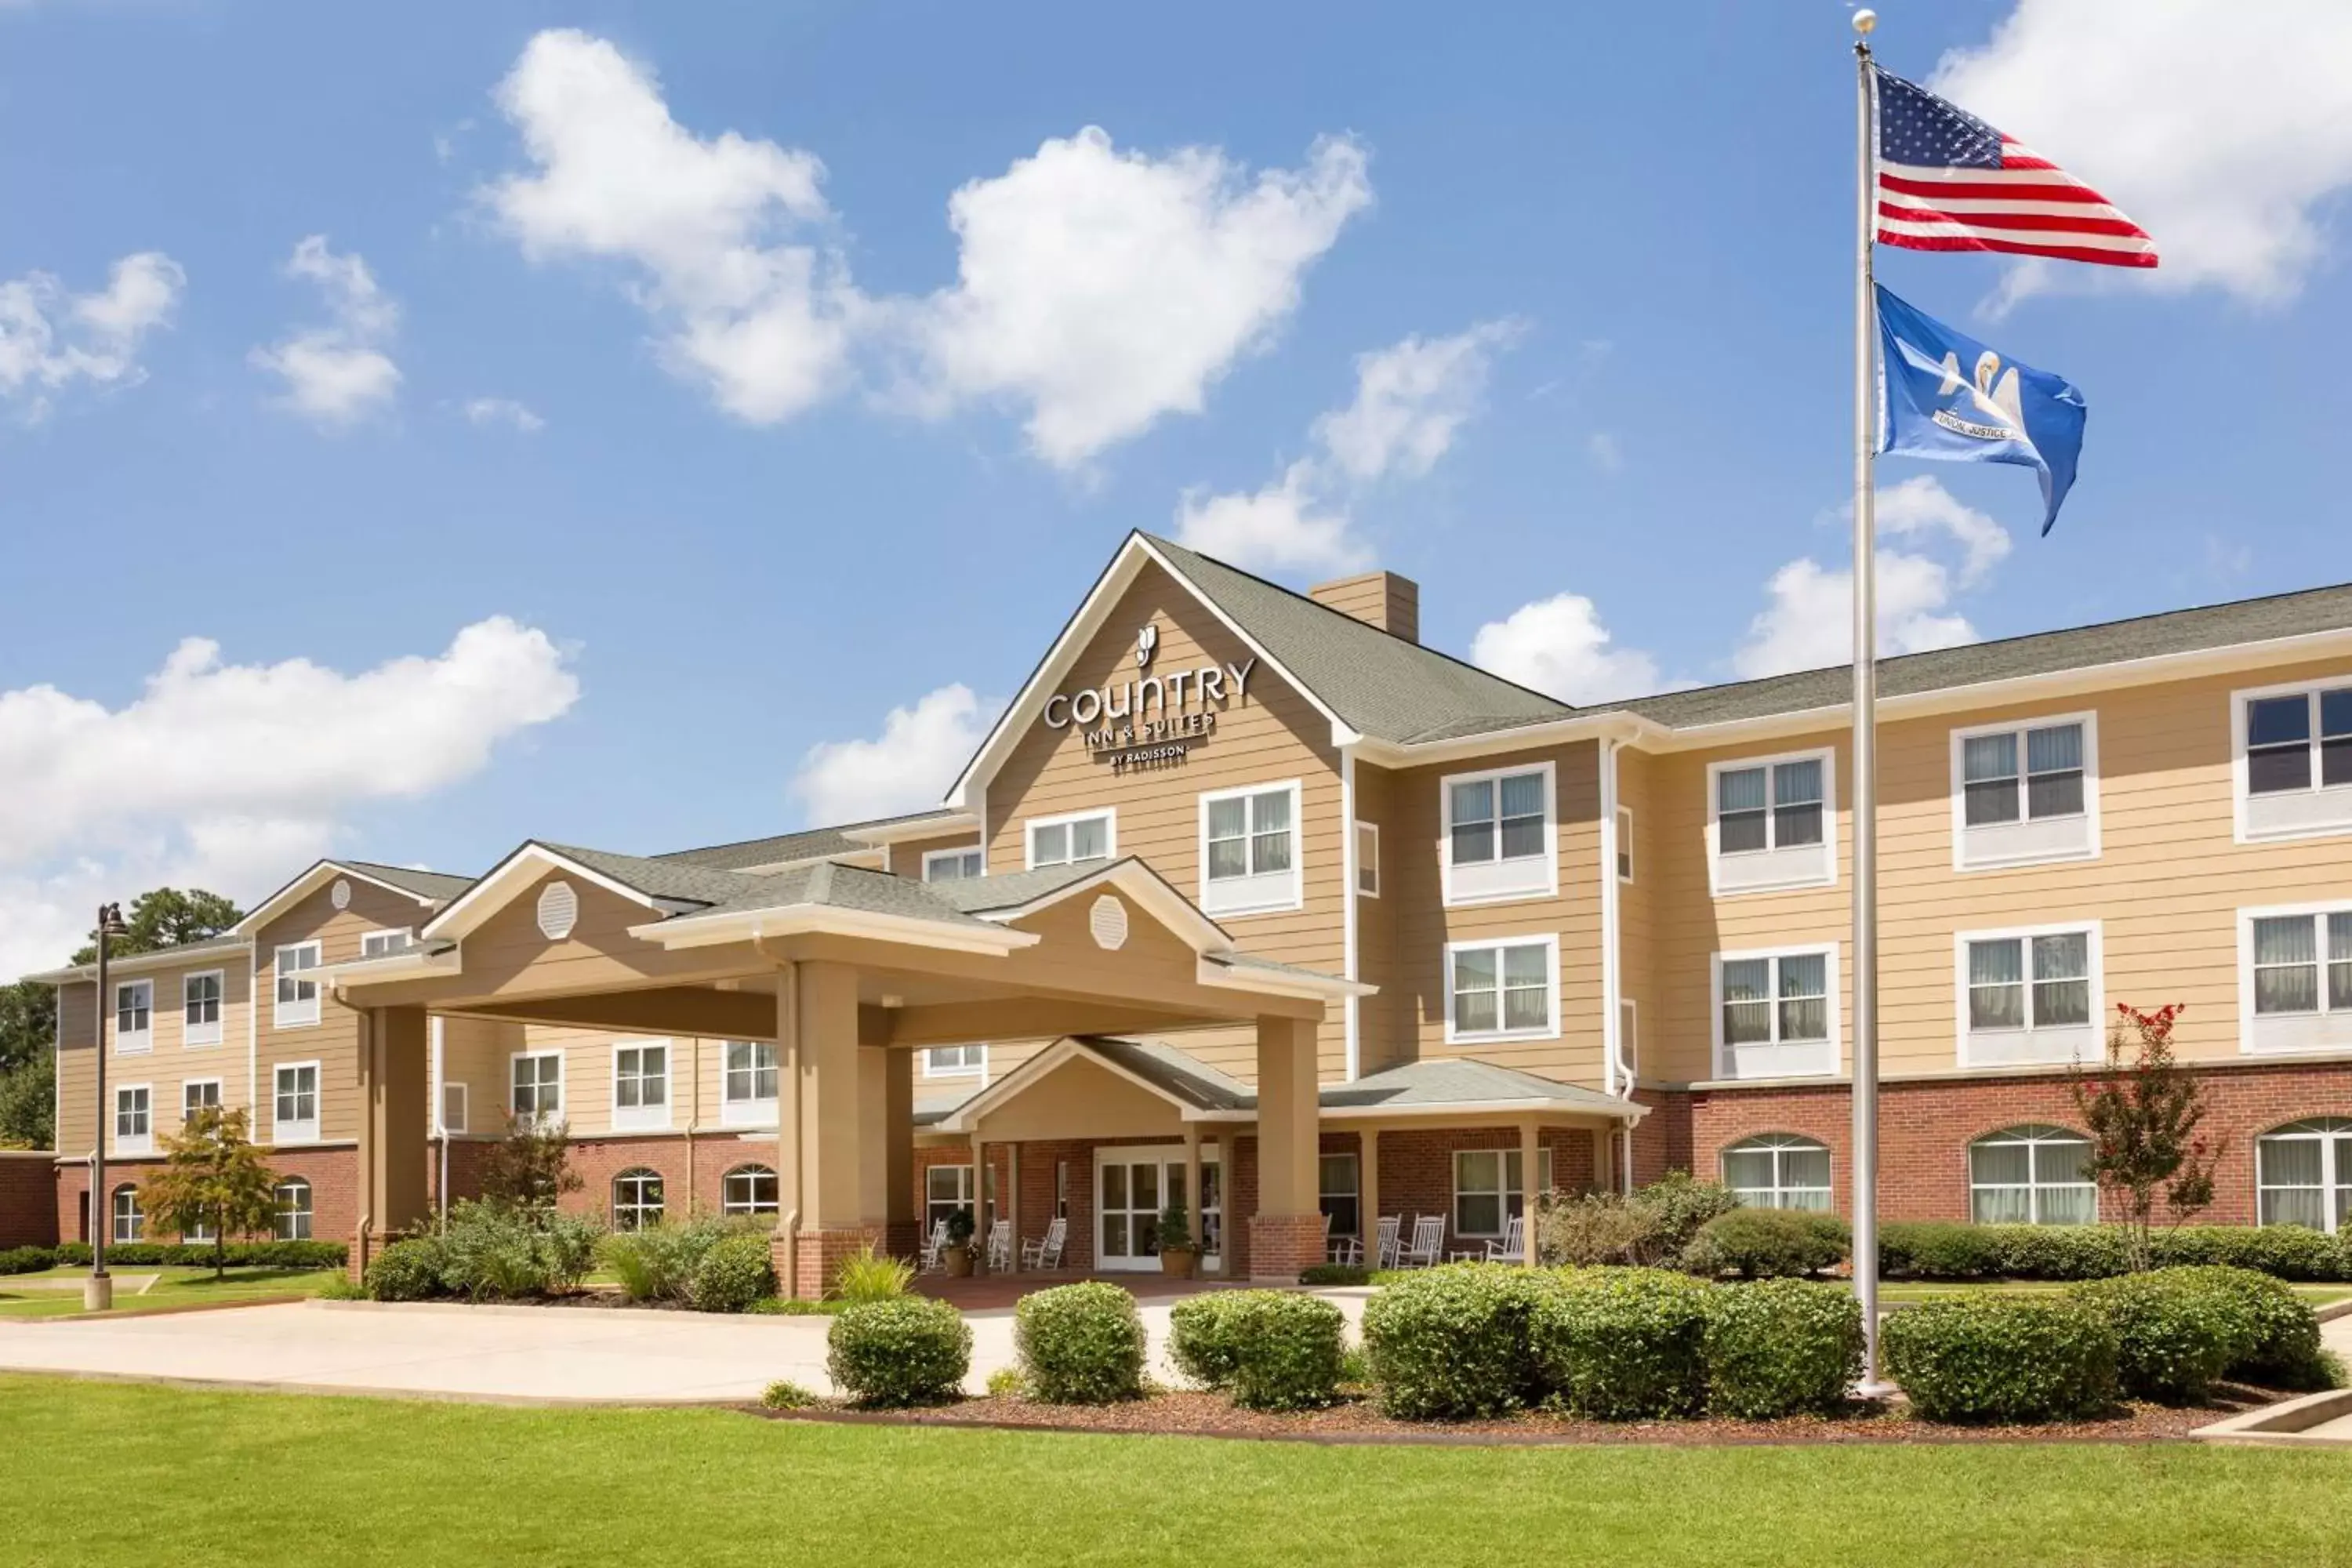 Property building in Country Inn & Suites by Radisson, Pineville, LA